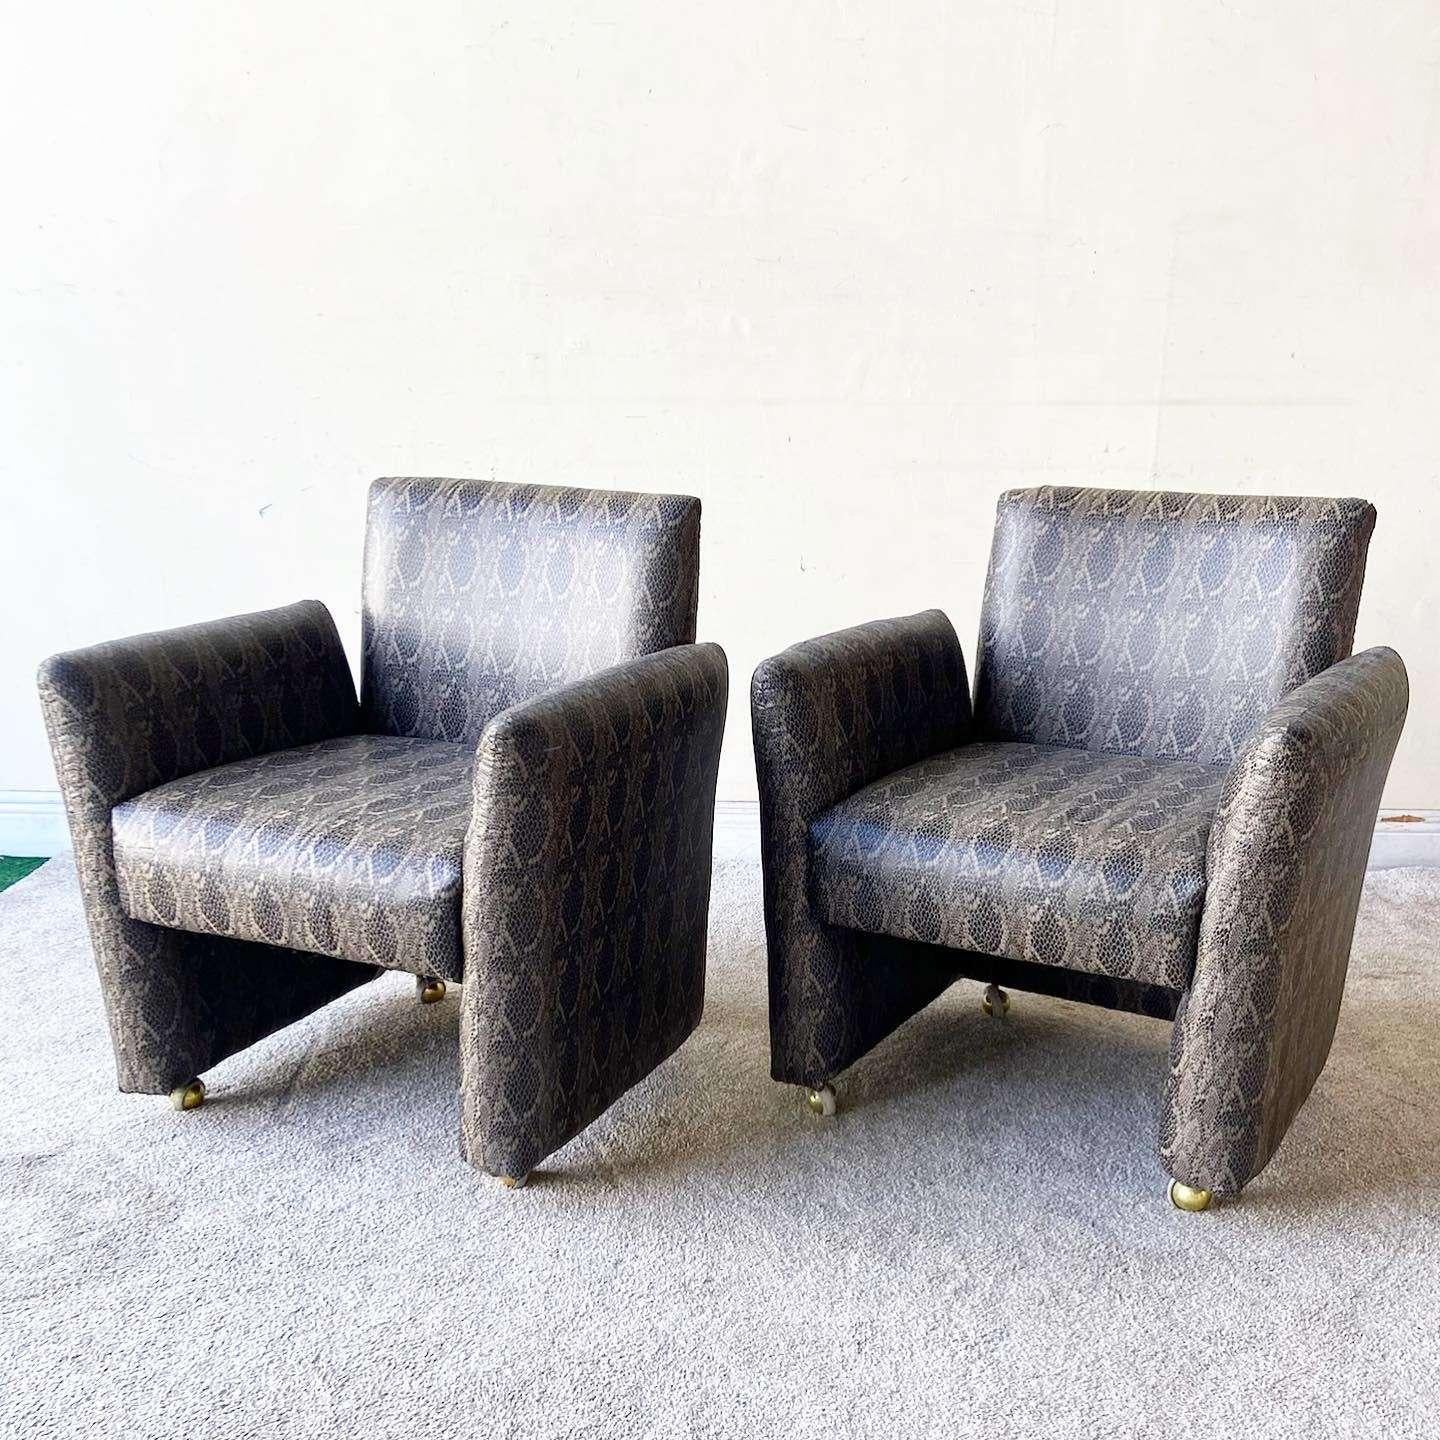 Exceptional pair of vintage postmodern “chiclet” chairs on wheels. Each feature a brilliant faux snake skins vinyl upholstery.

Seat height is 18.5 in
